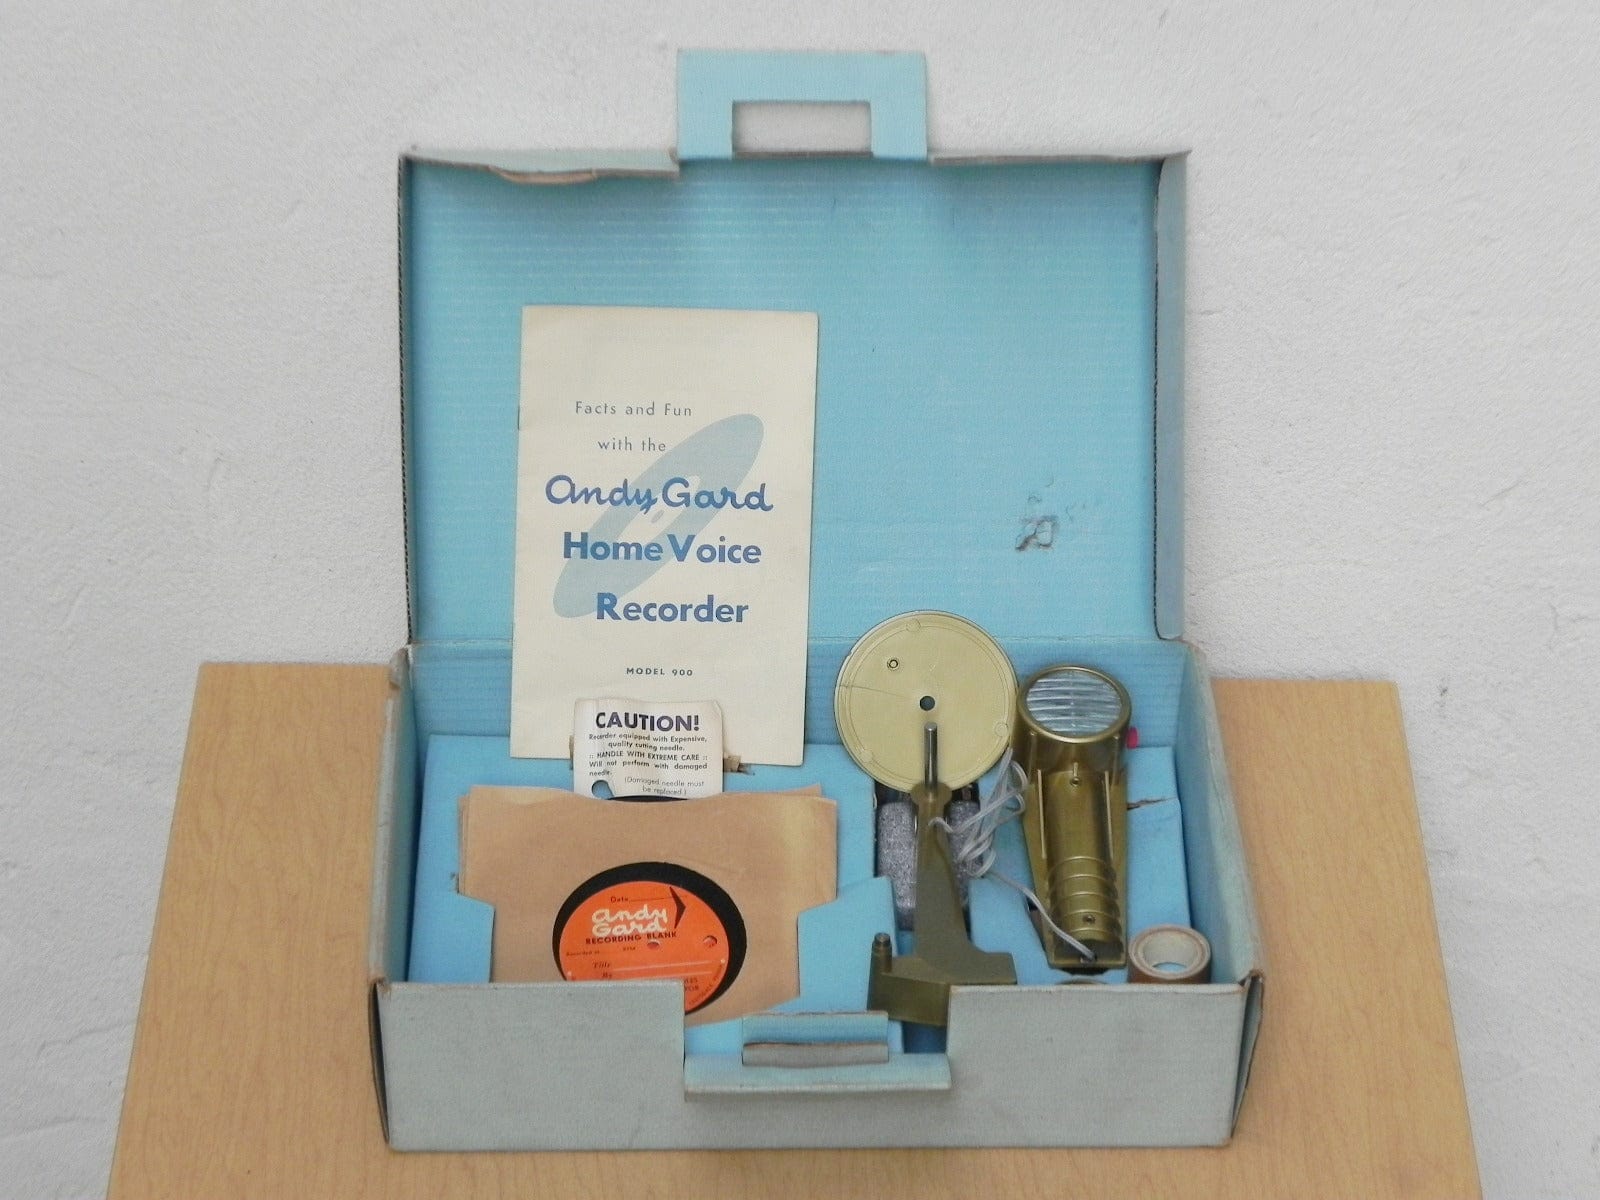 I Like Mike's Mid Century Modern Accessories Andy Gard Home Voice Recorder in Box with Blanks, New in Box, From 1958